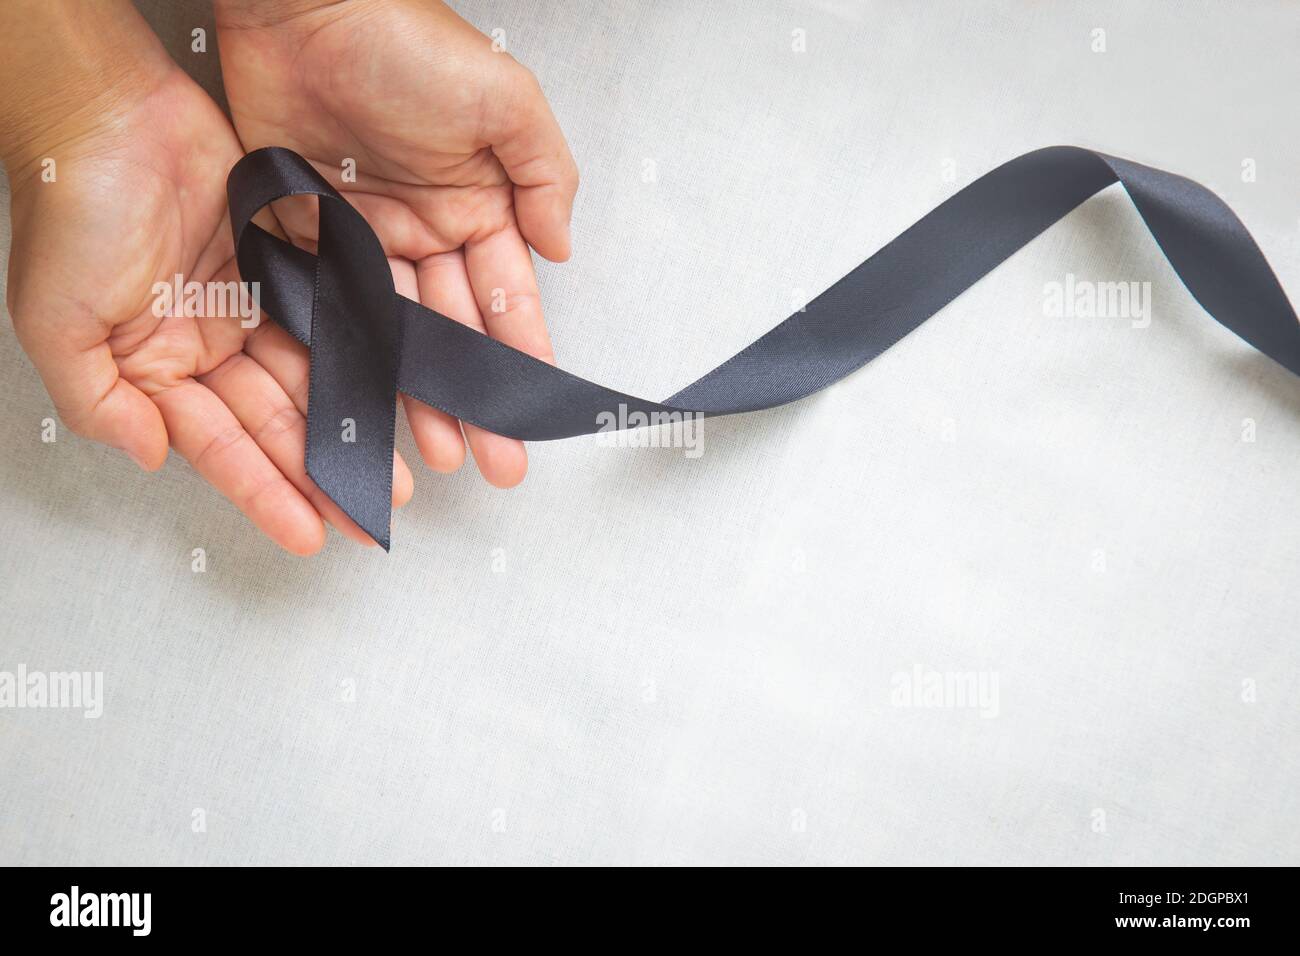 Hand holding Black ribbon on white fabric background with copy space, symbol of Skin Cancer awareness month on May, Melanoma cancer, Mourning ribbon s Stock Photo